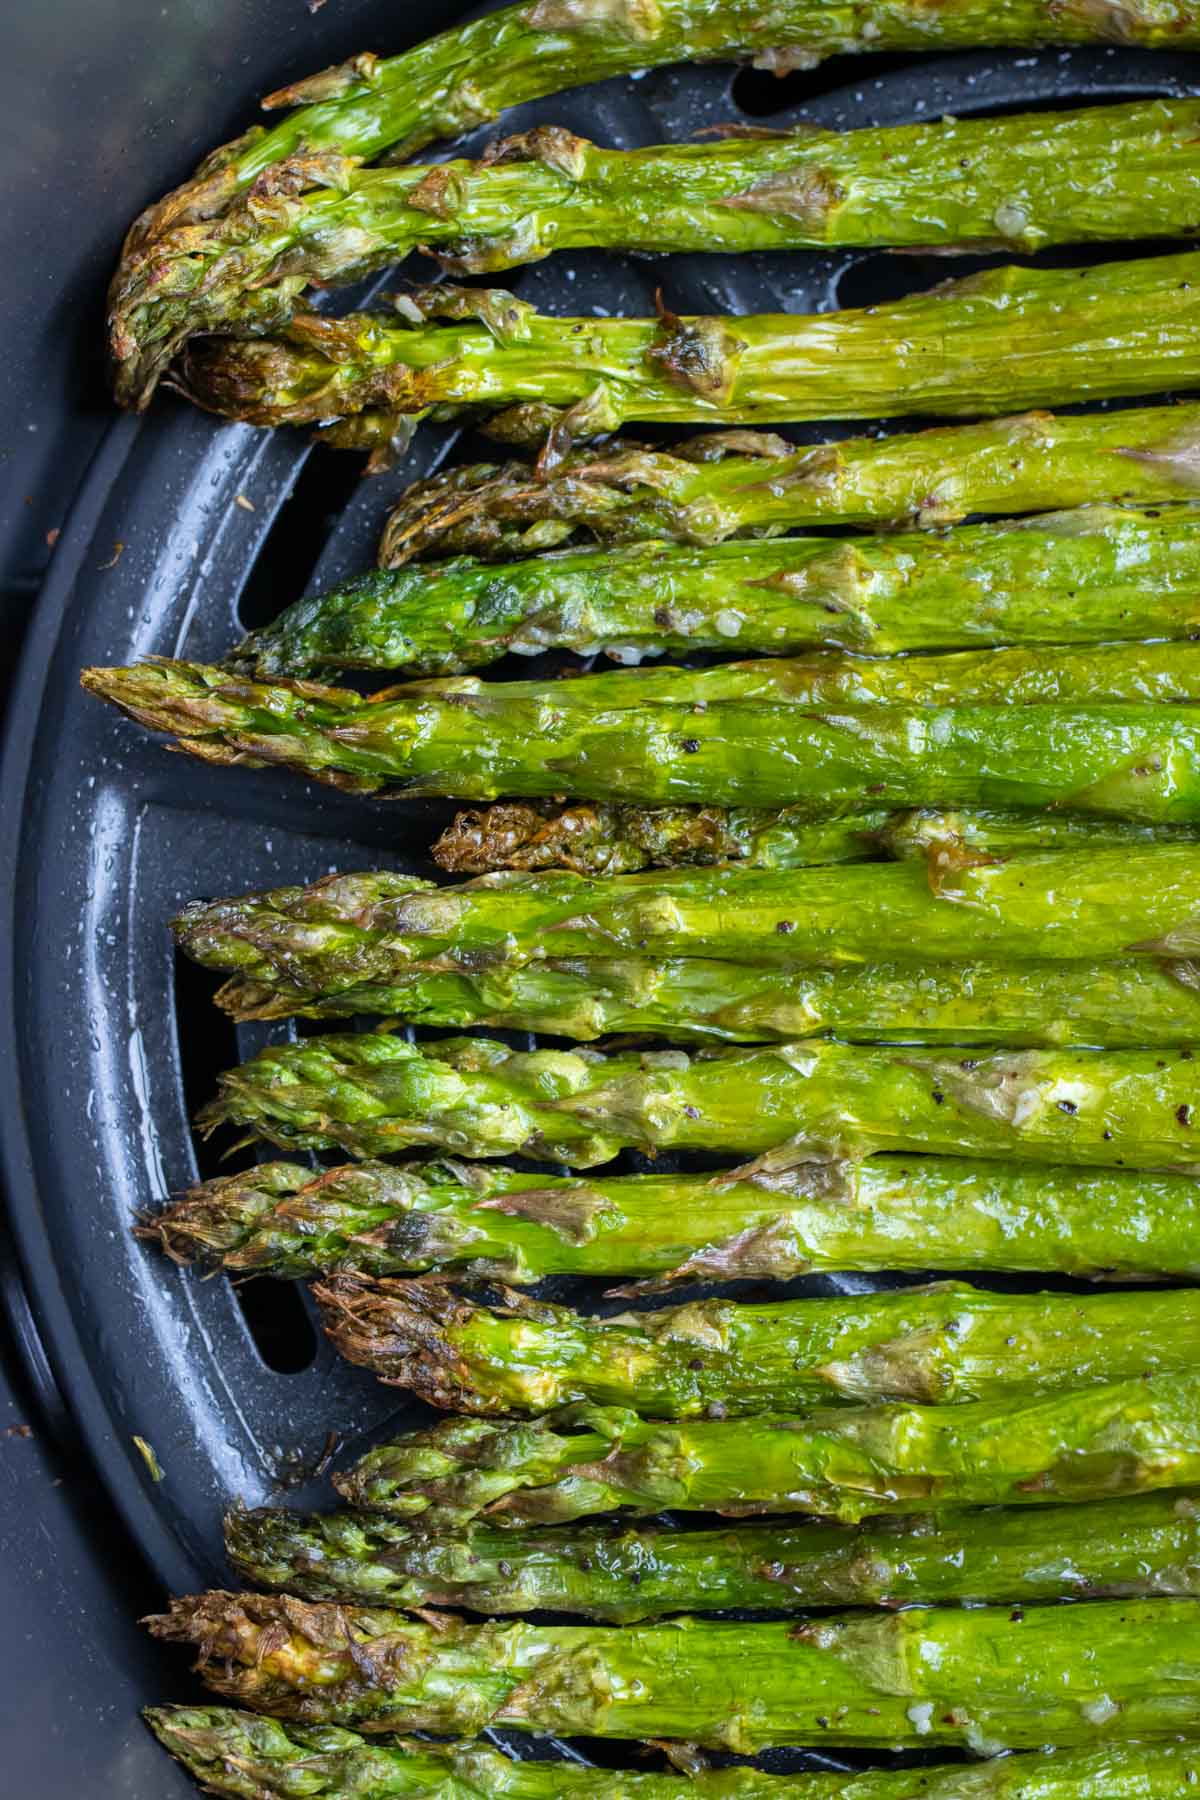 Tender asparagus is cooked in the air fryer.